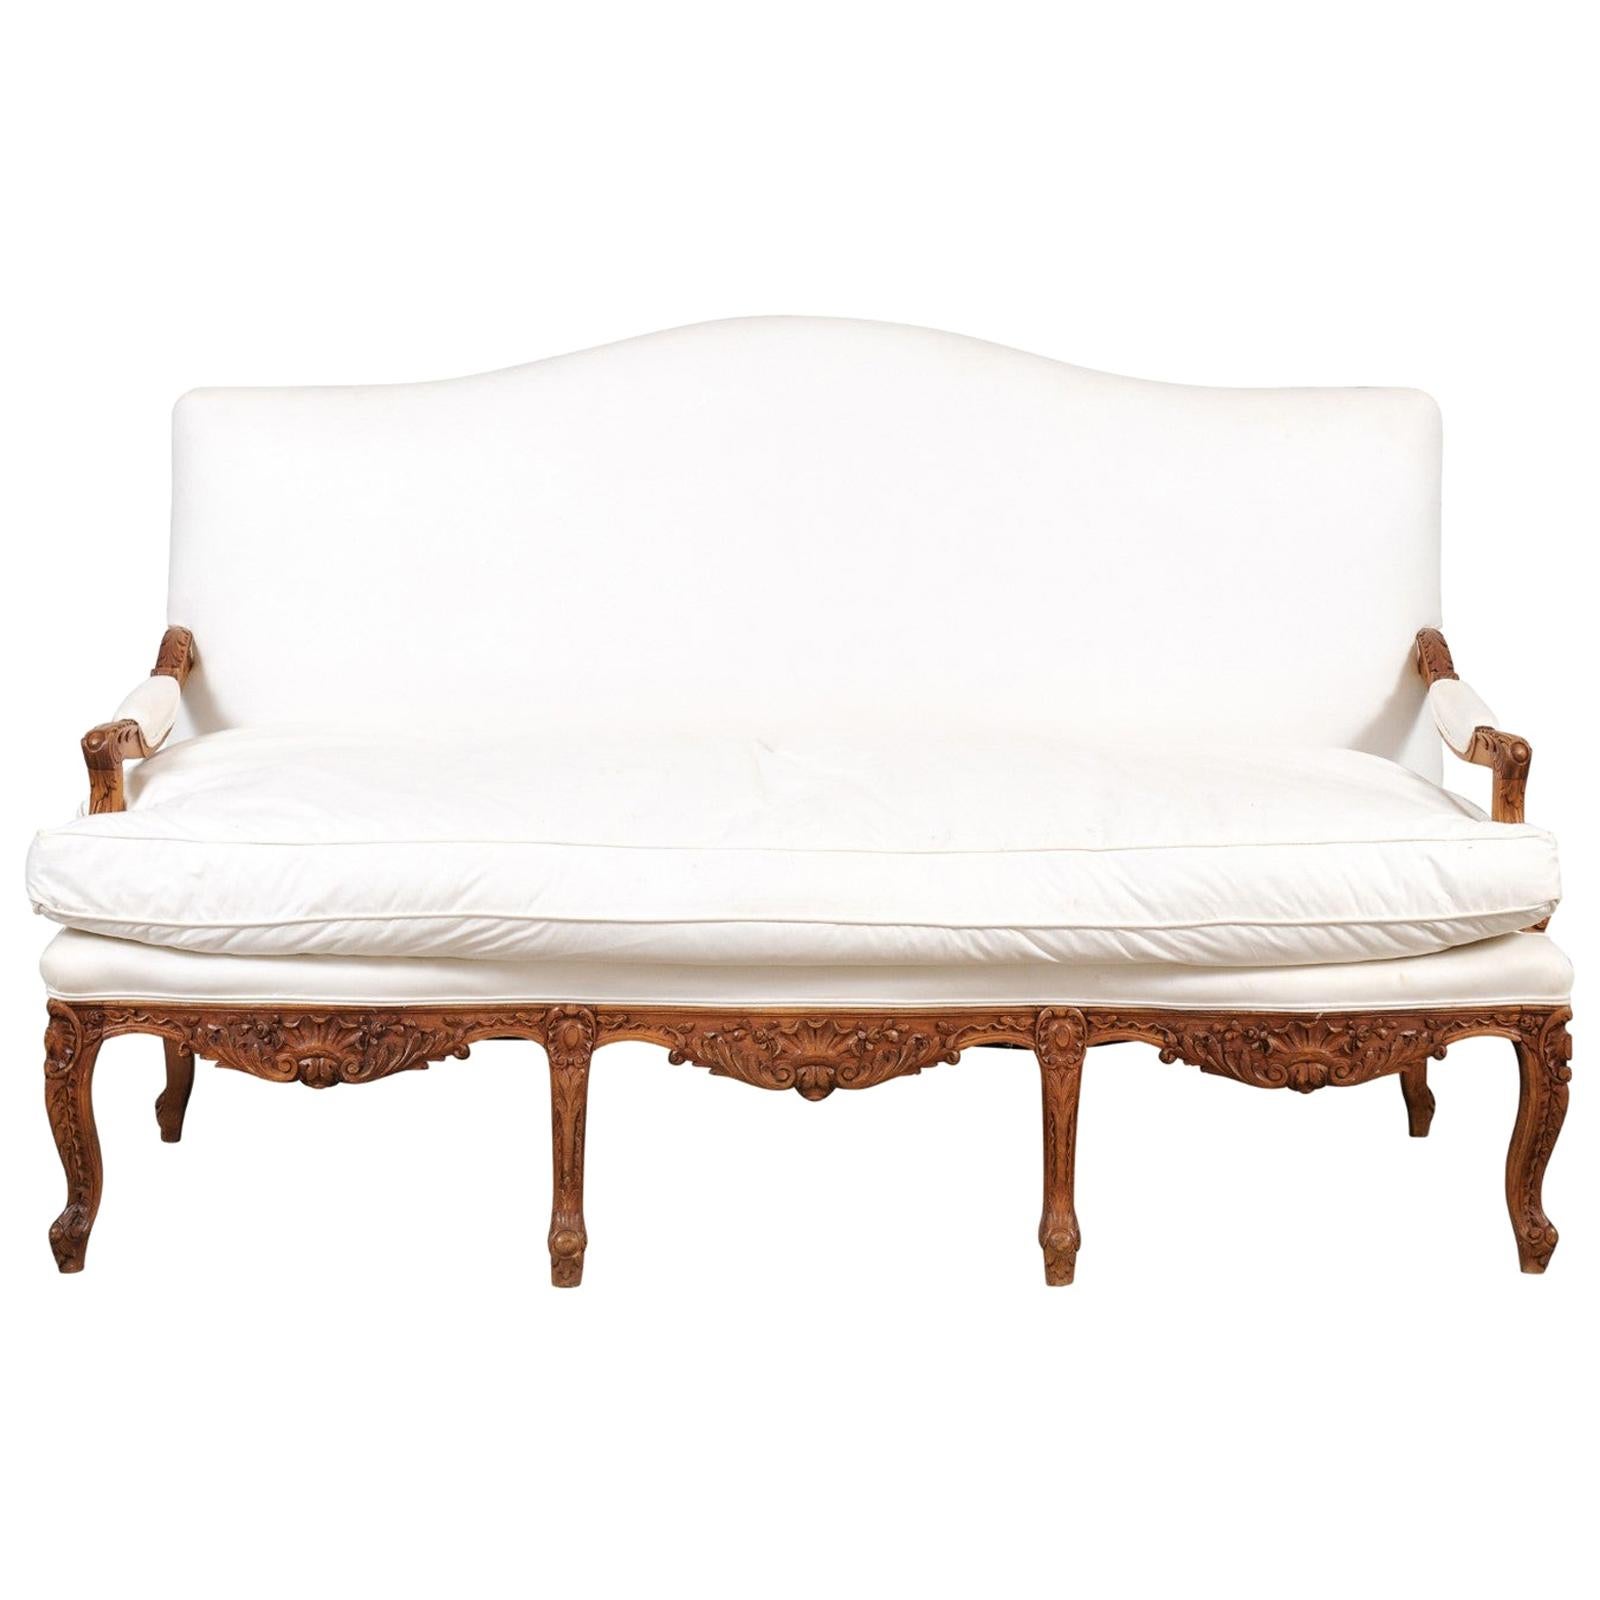 French 1850s Régence Style Three-Seat Canapé with Carved Shells and Upholstery